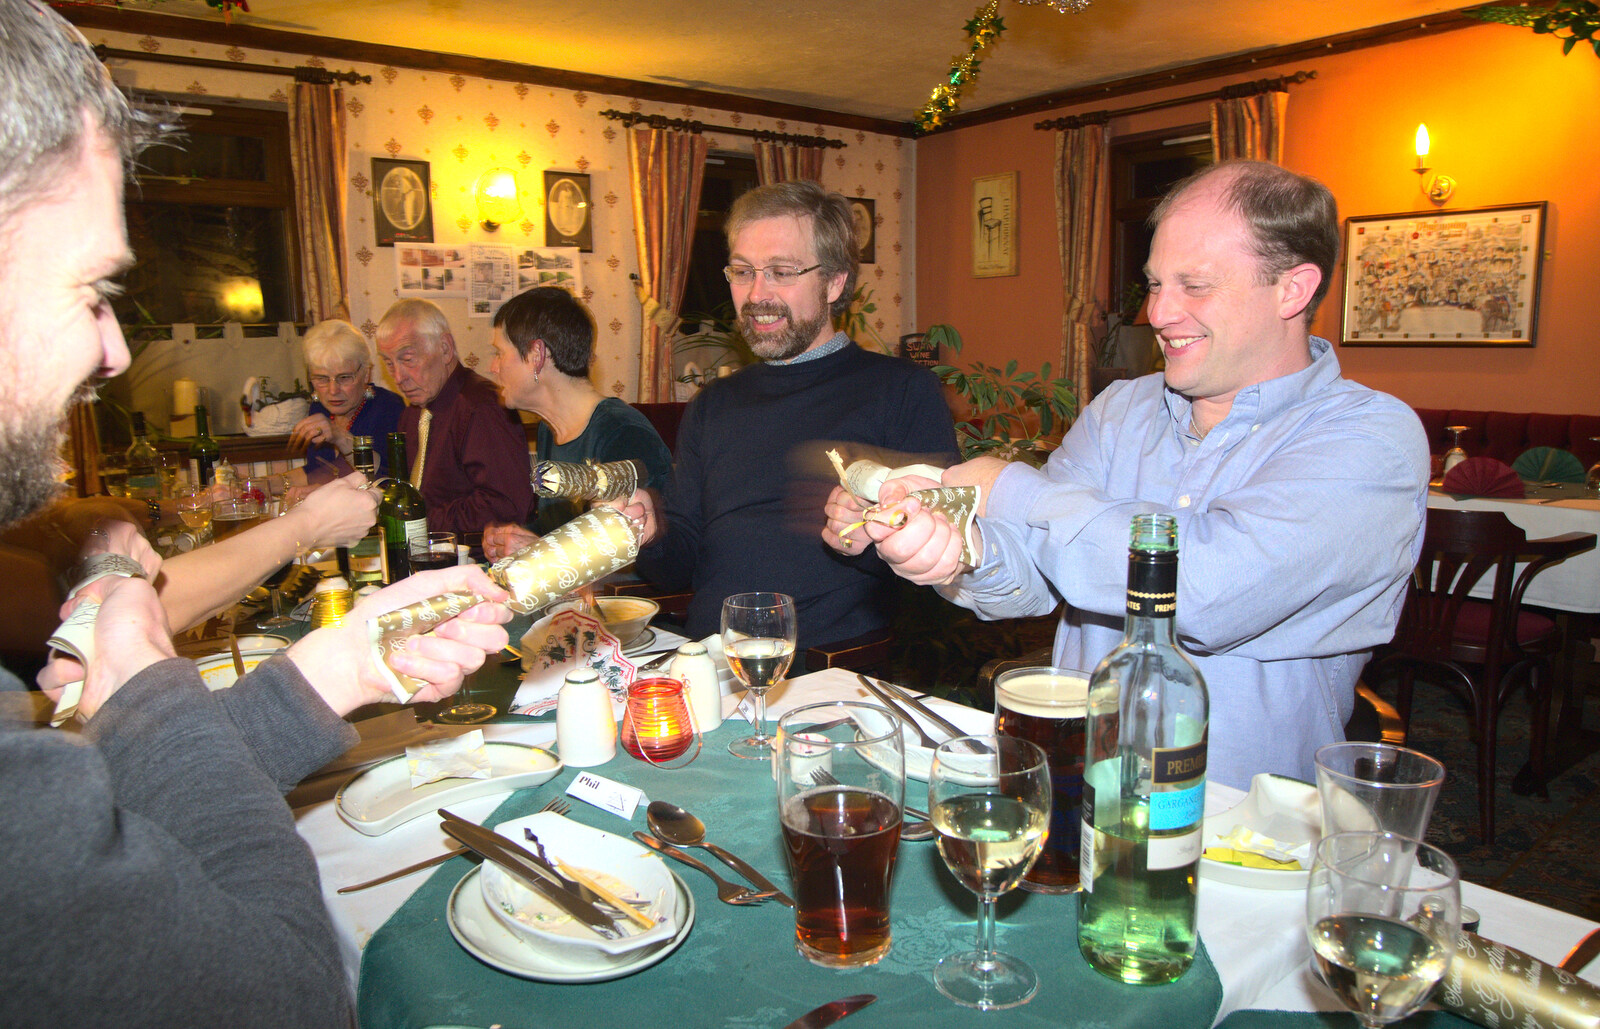 Crackers are pulled from The BSCC Christmas Dinner, The Swan Inn, Brome, Suffolk - 6th December 2014